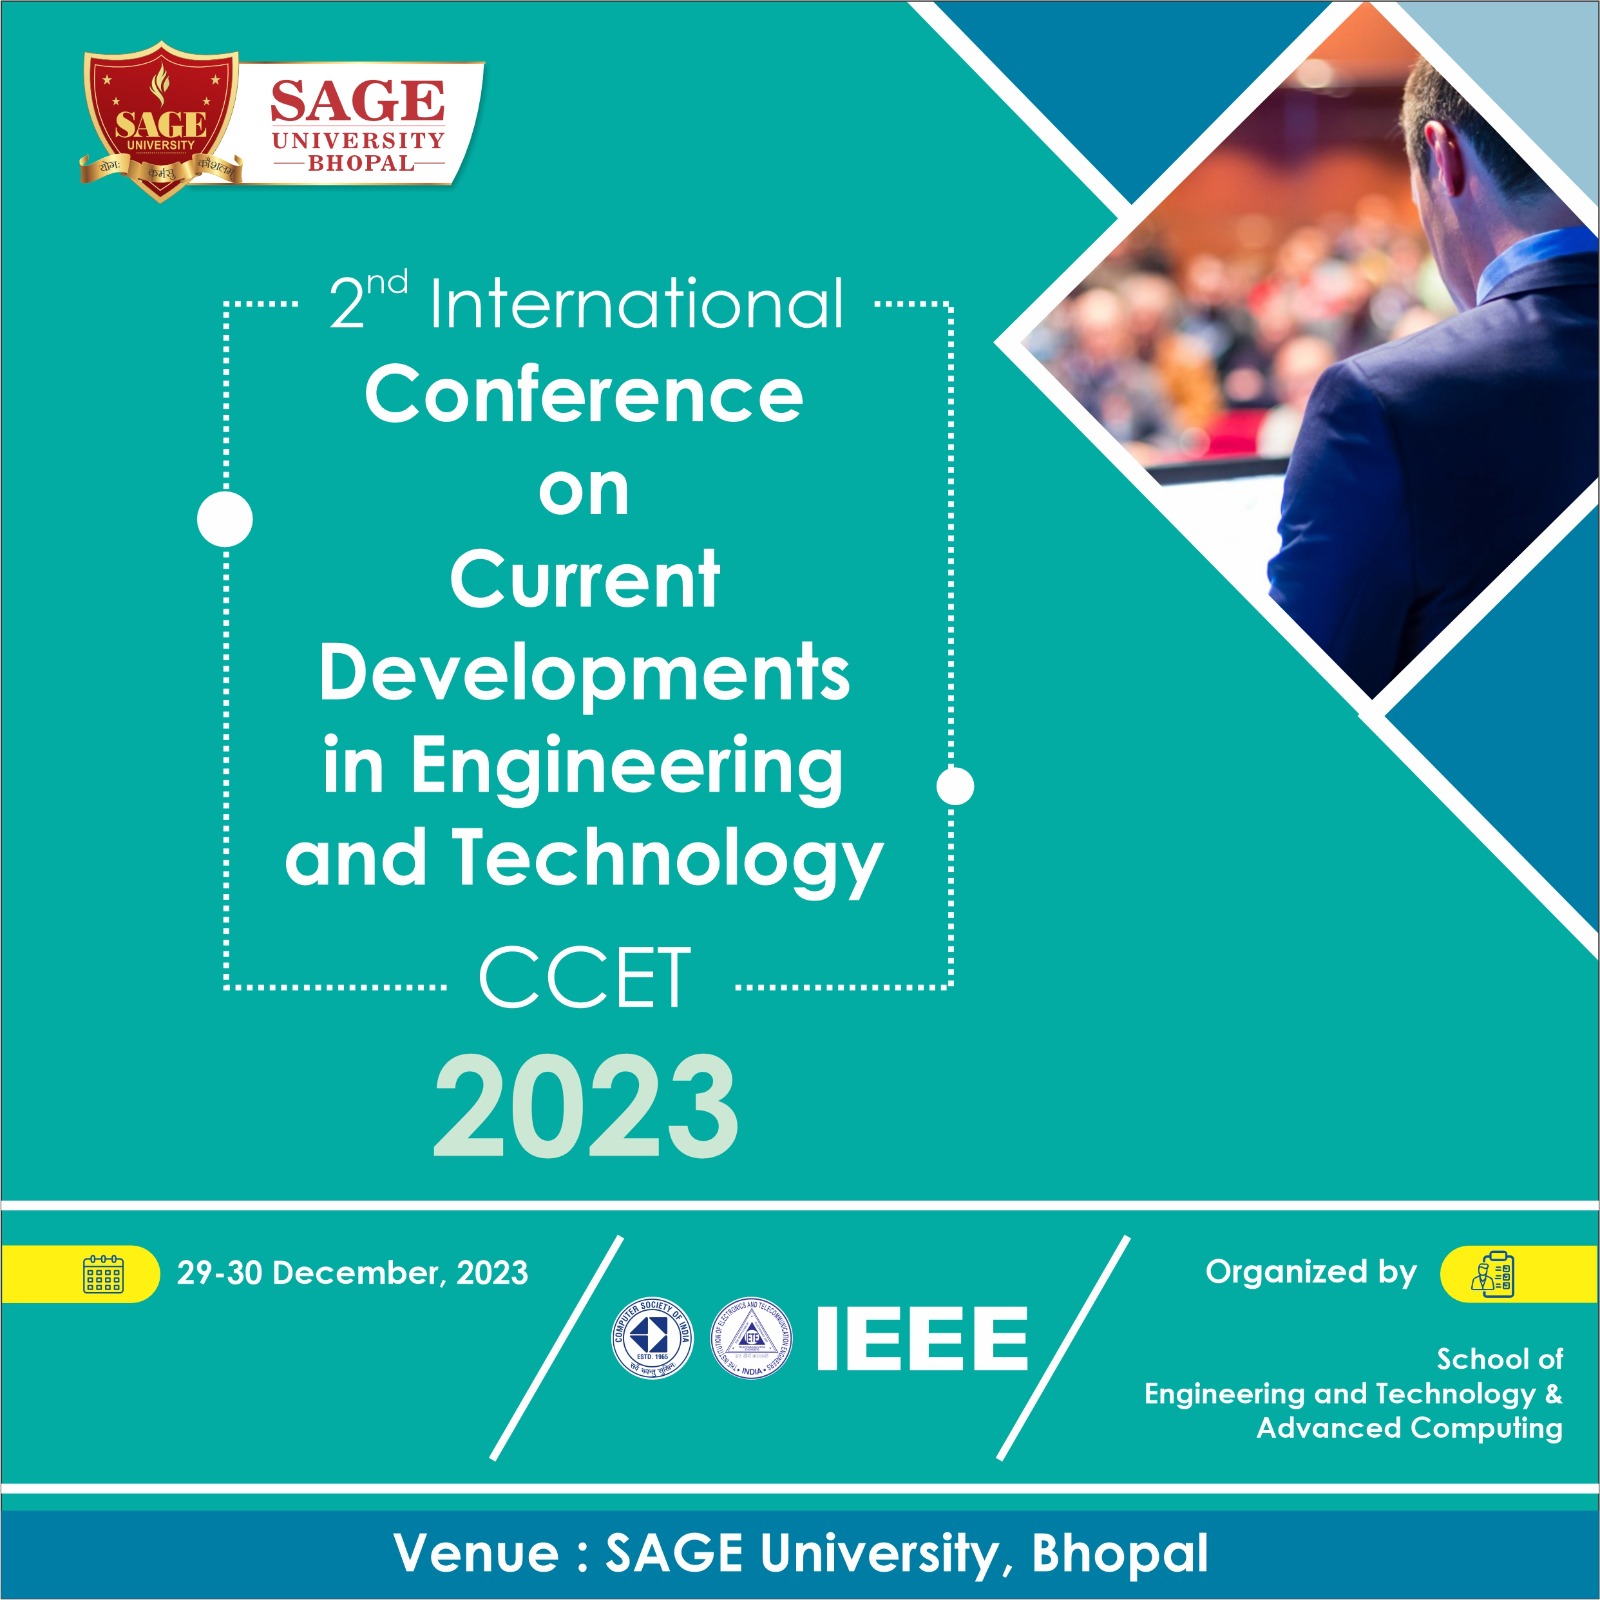 International Conference on Current Development in Engineering and Technology 2023